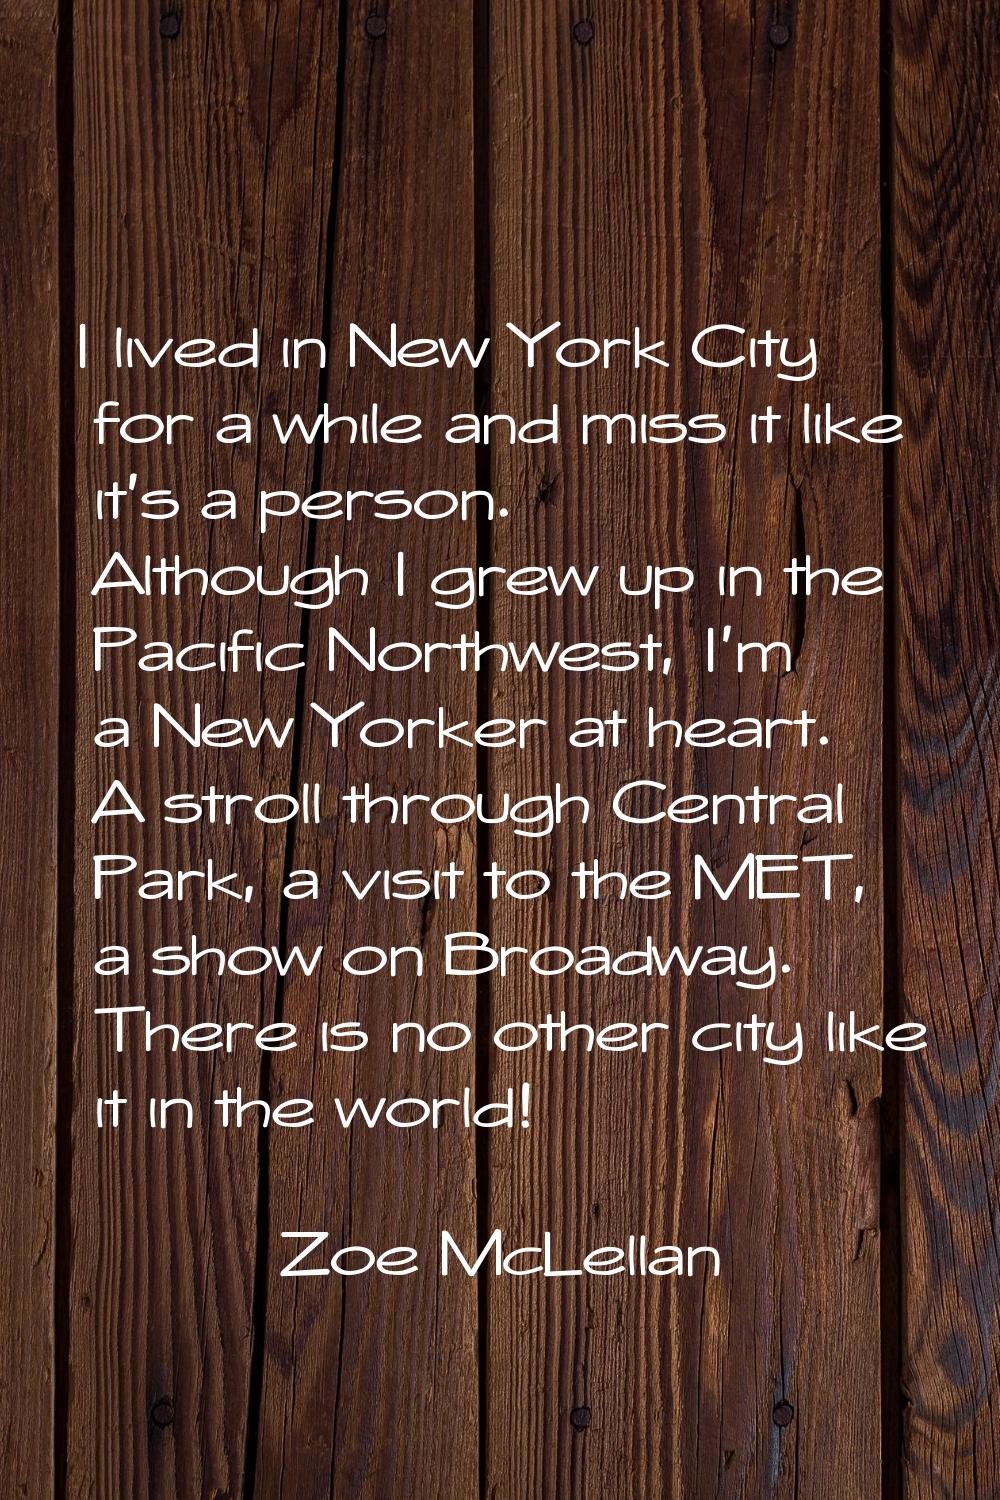 I lived in New York City for a while and miss it like it's a person. Although I grew up in the Paci